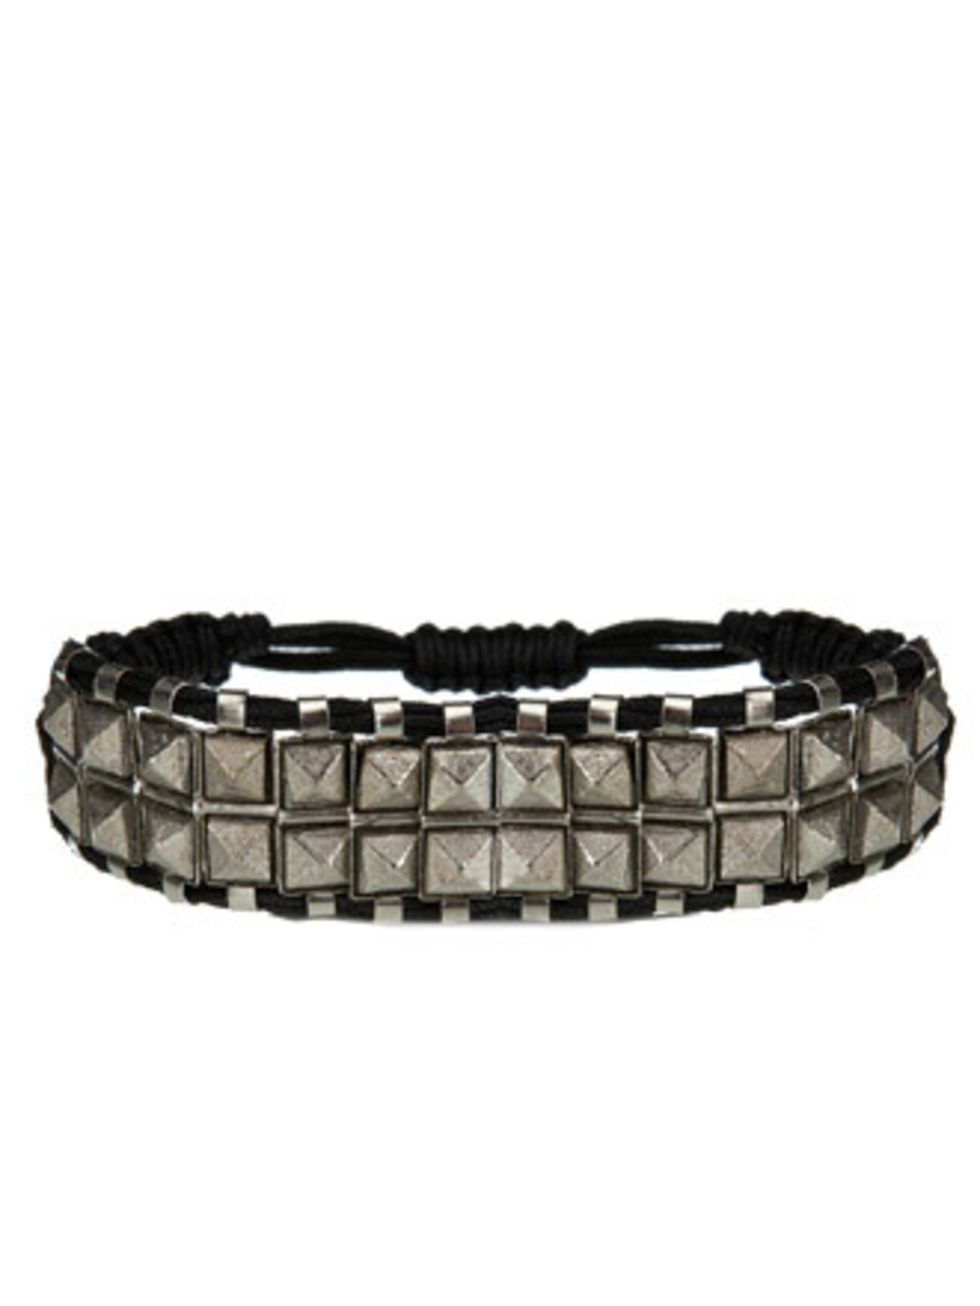 <p>This studded bracelet will add much needed edge to summer florals and will look great paired with dark teal nails (the a/w shade) come winter.Bracelet, £70 by Shashi at <a href="http://www.bunnyhug.co.uk/fashionshop/gbu0-prodshow/Shashi_Rocker_Stud_Bra